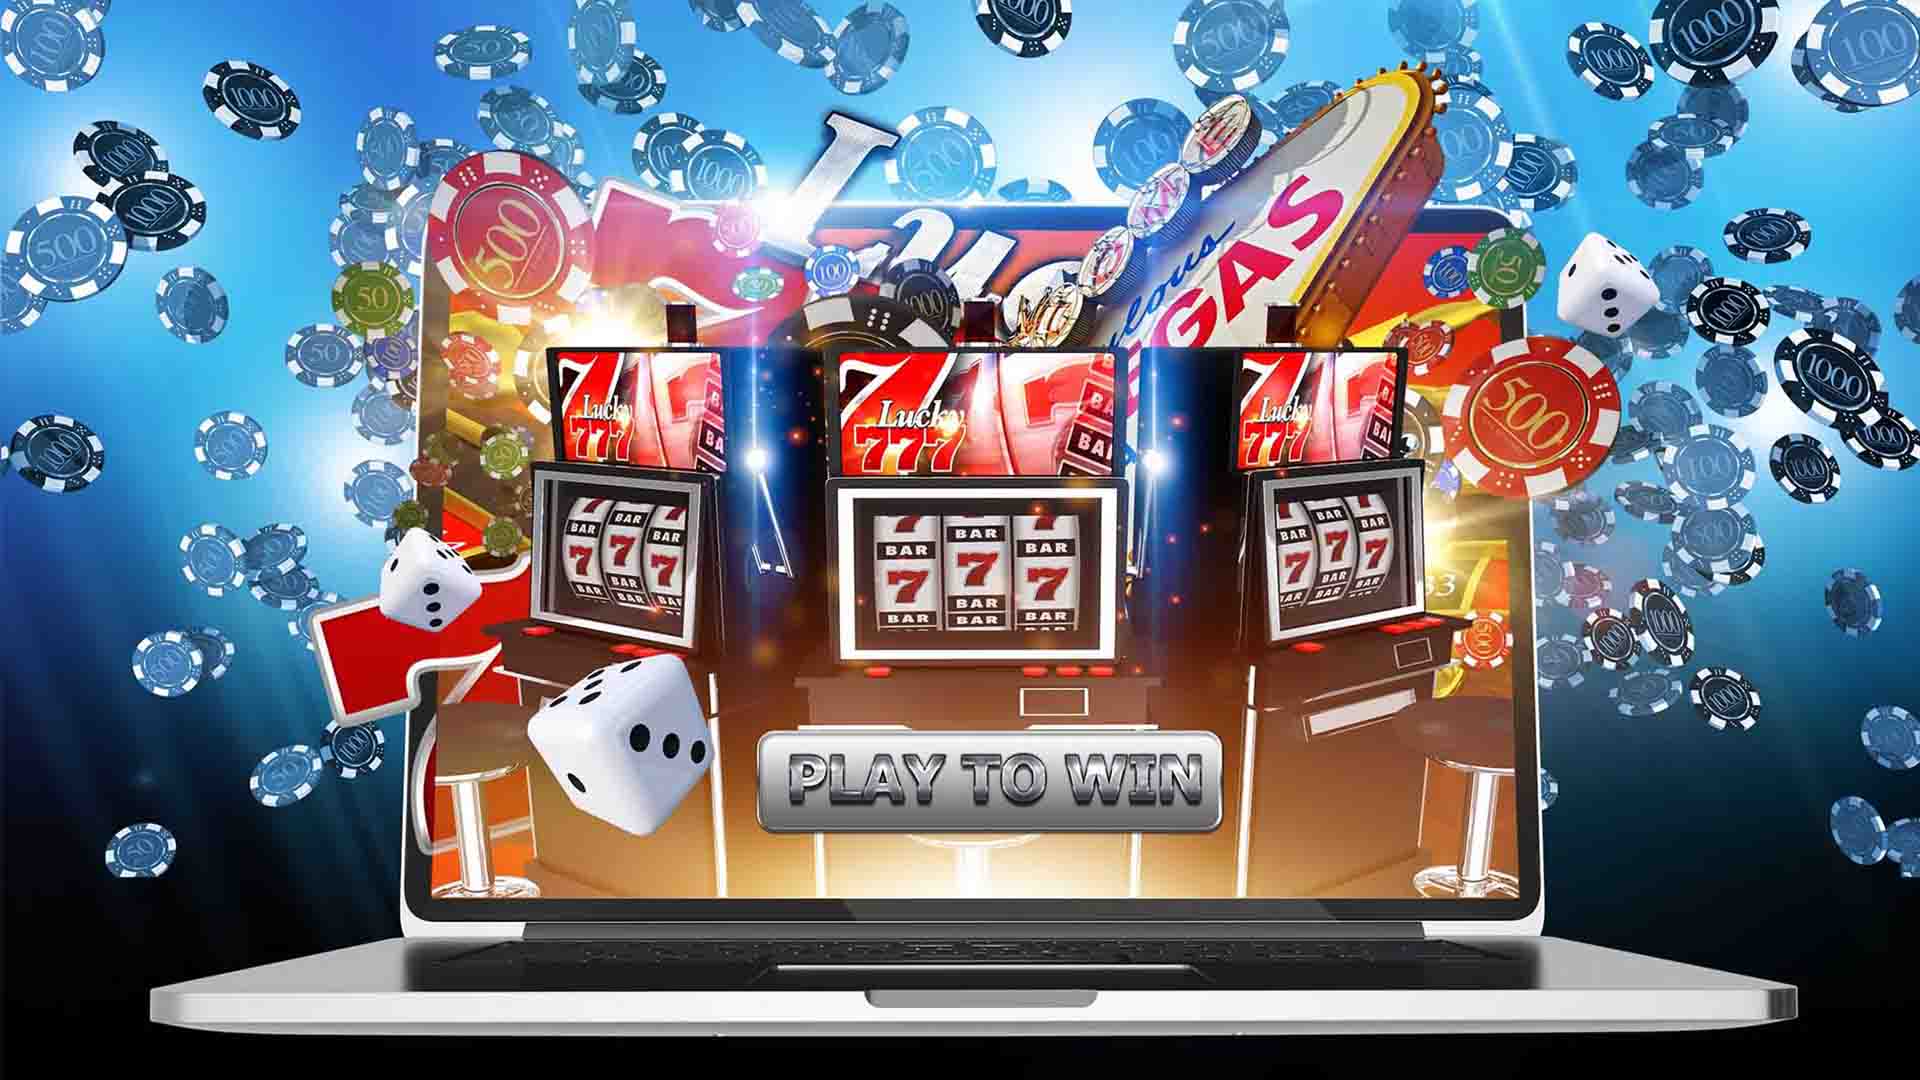 highest payout online casino